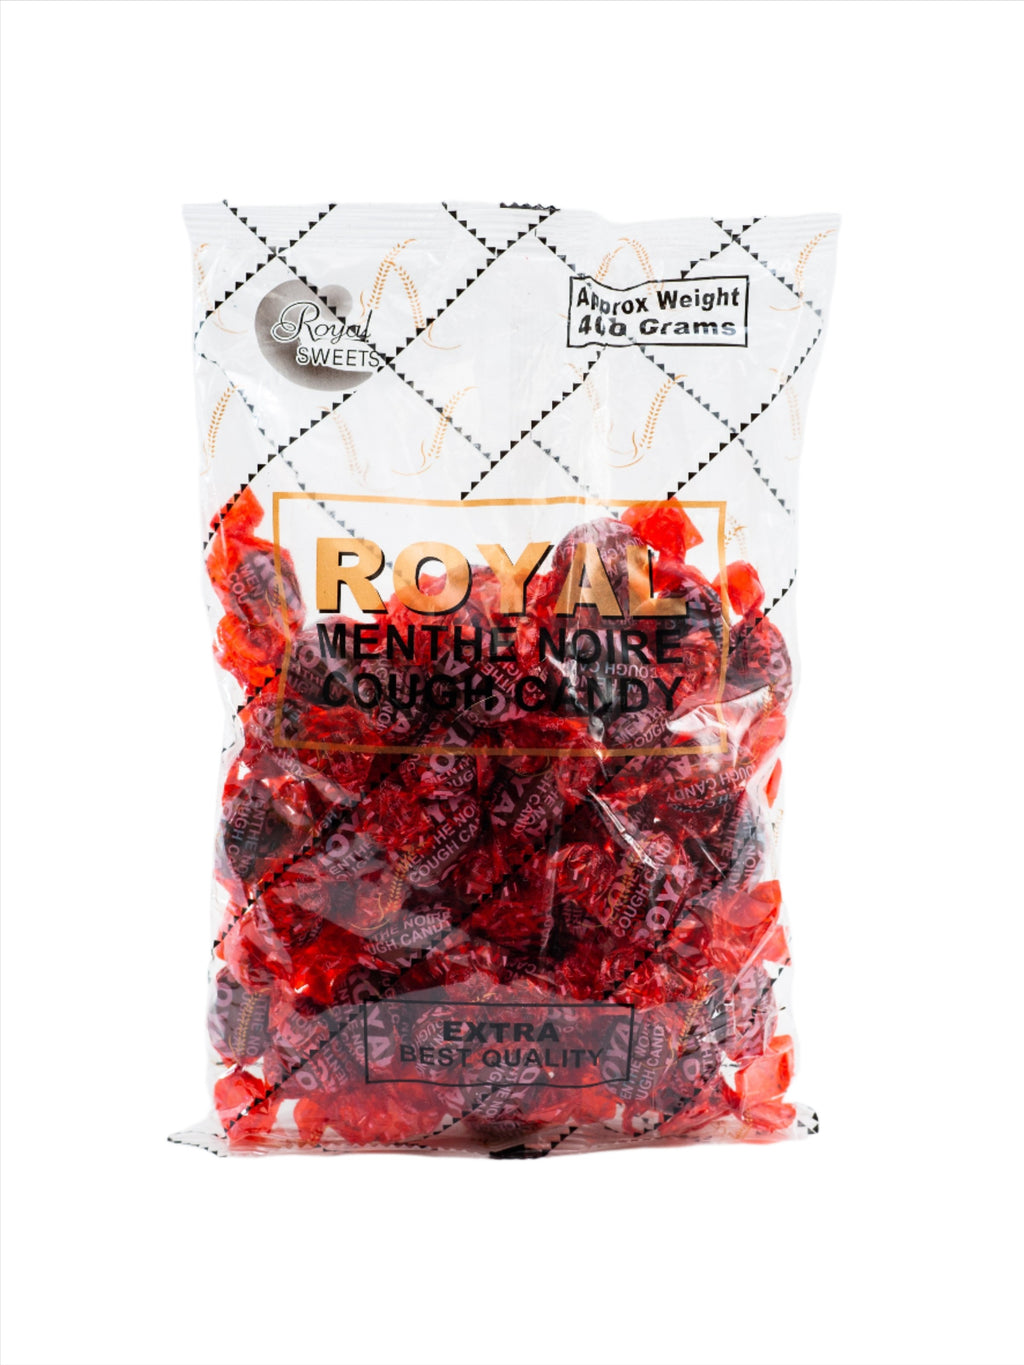 Bonbon Gingembre/ Begue Candy/ Ginger Candy/ African Candy / Senegal Candy  1 Pack -  Finland